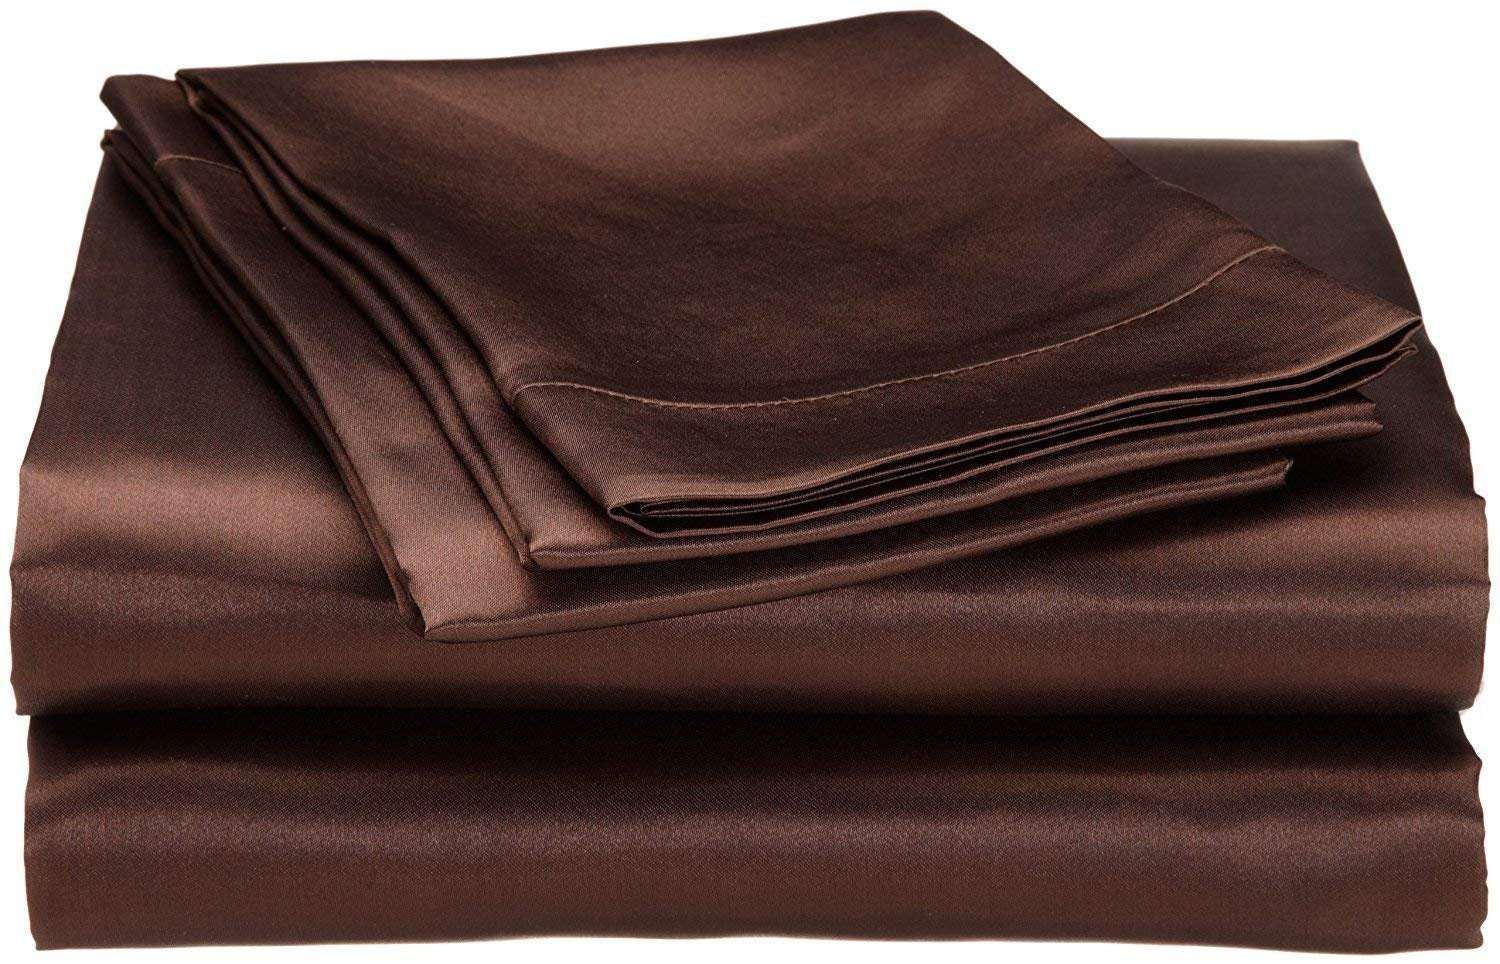 6 Inch Pocket Sheet Set Mulberry Sateen Silk Chocolate at-www.egyptianhomelinens.com